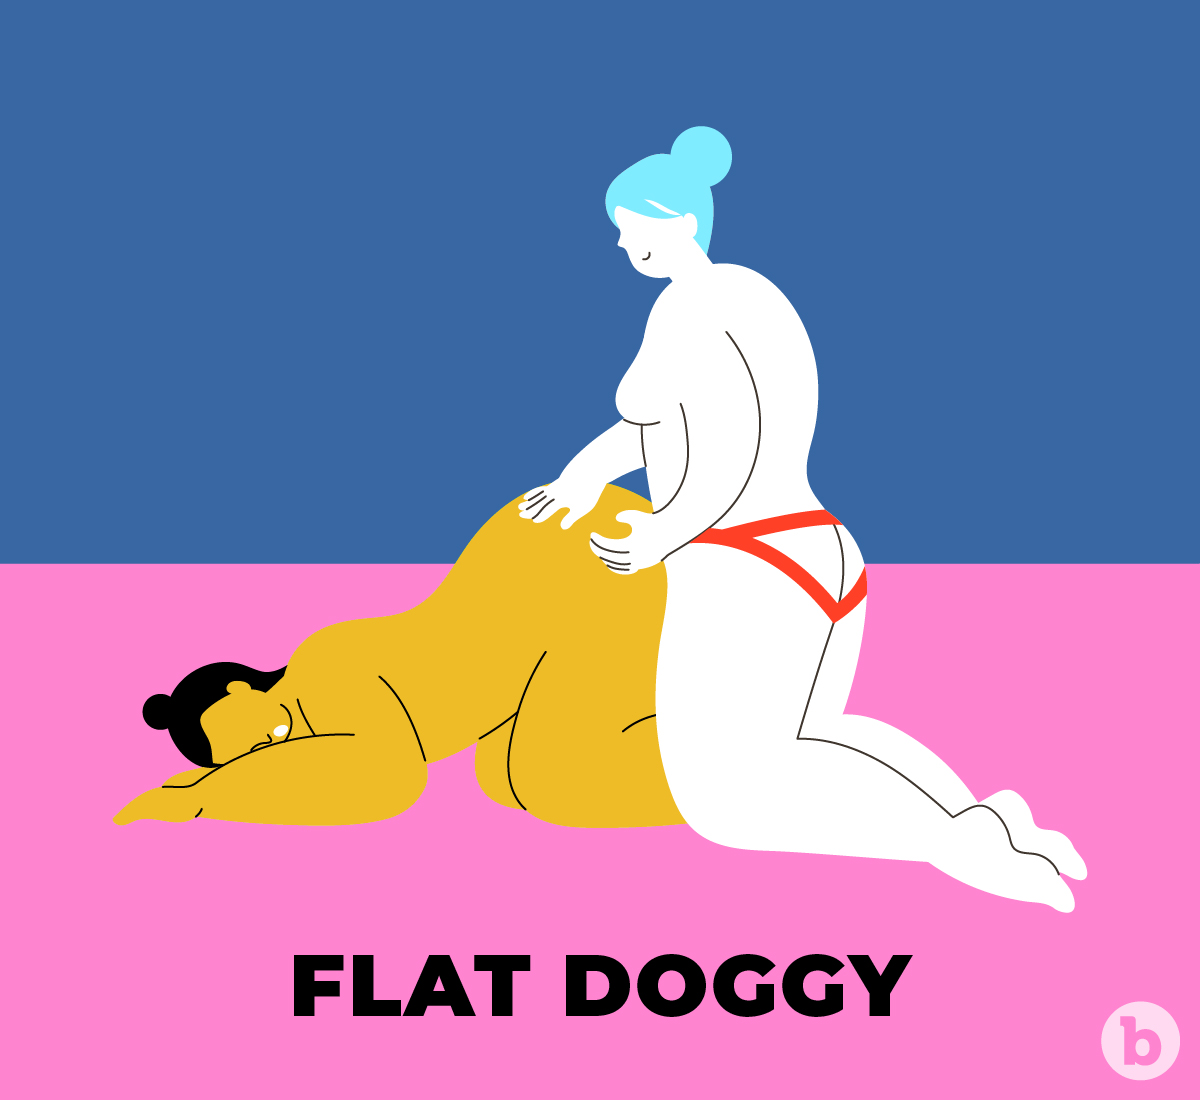 The flat doggy position allows for deeper penetration during pegging and anal sex